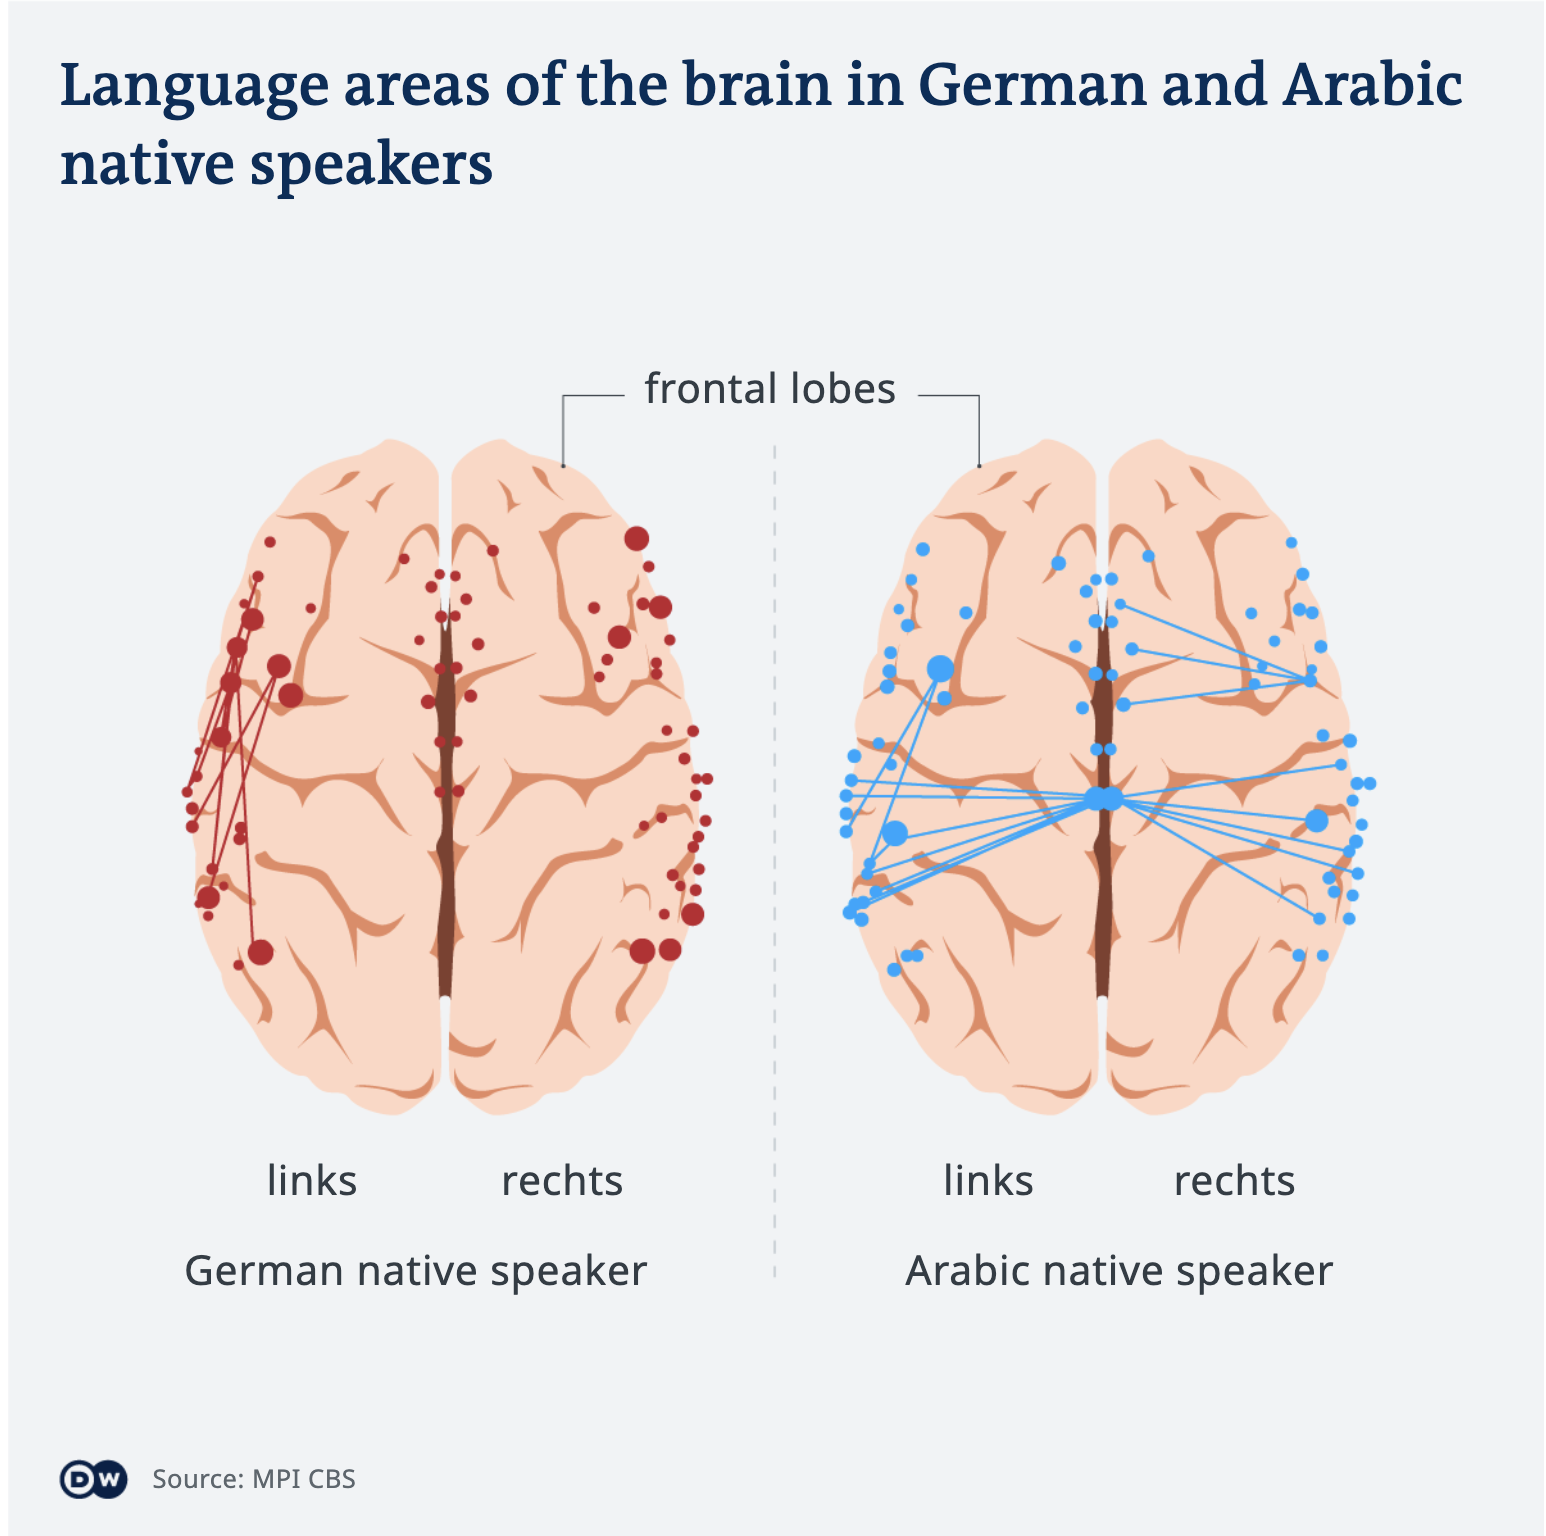 Language areas of the brain in native speakers of German and Arabic (source: MPI CBS/DW)